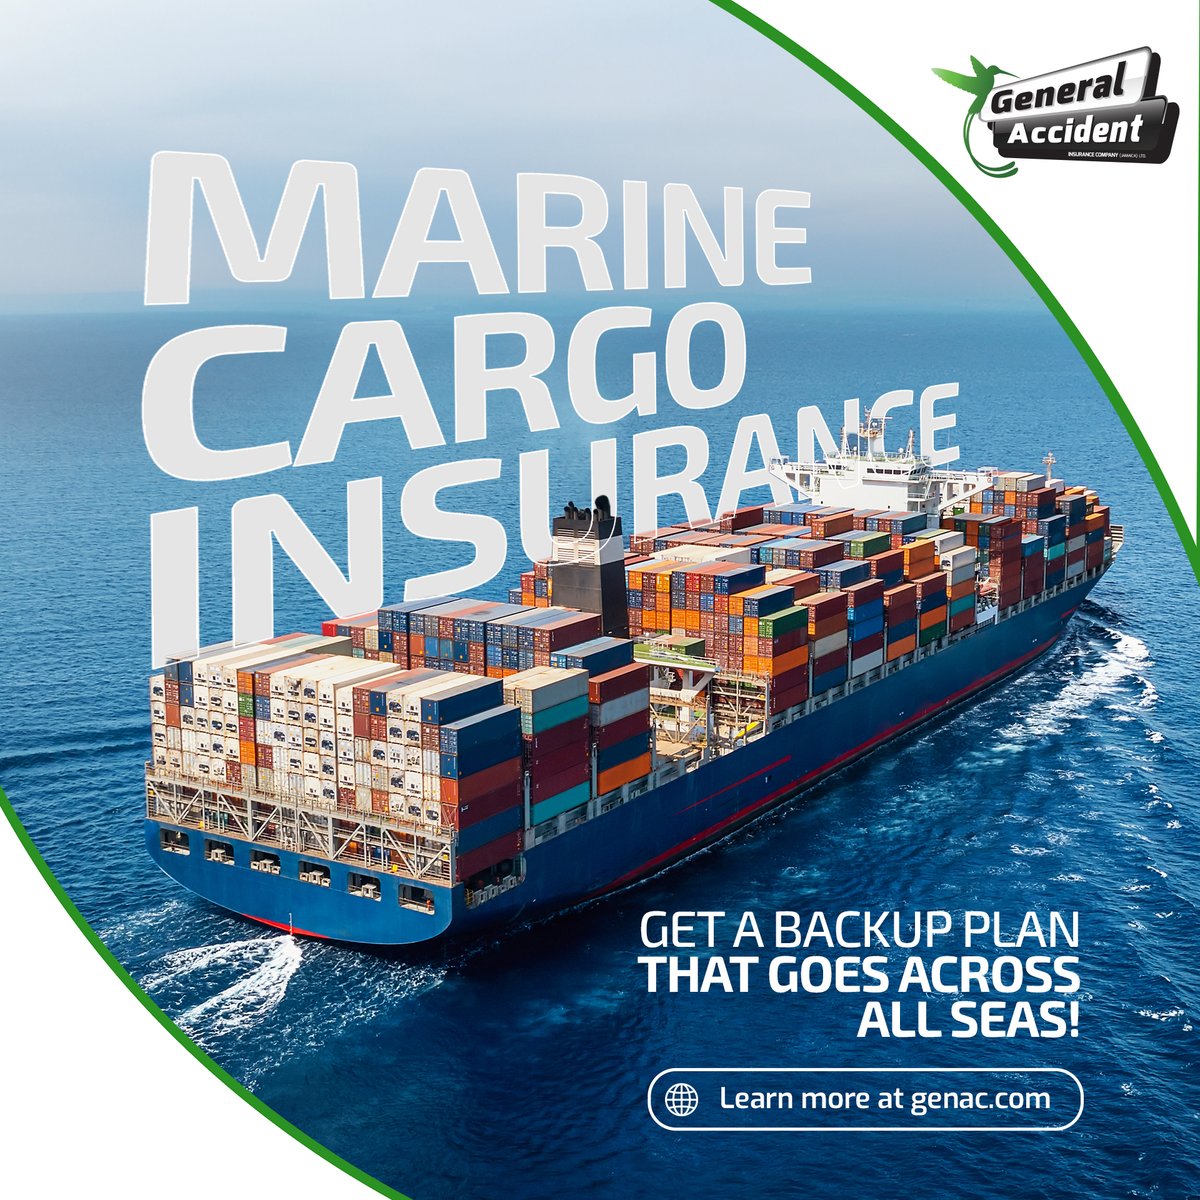 Navigate uncertainties with confidence! Our Marine Cargo Insurance offers a backup plan that goes across all seas. Learn more at brnw.ch/21wK9rw. #MarineCargoInsurance #BackupPlan #GenacJA #Jamaica #Insurance #BackUpPlan #MarineCargo